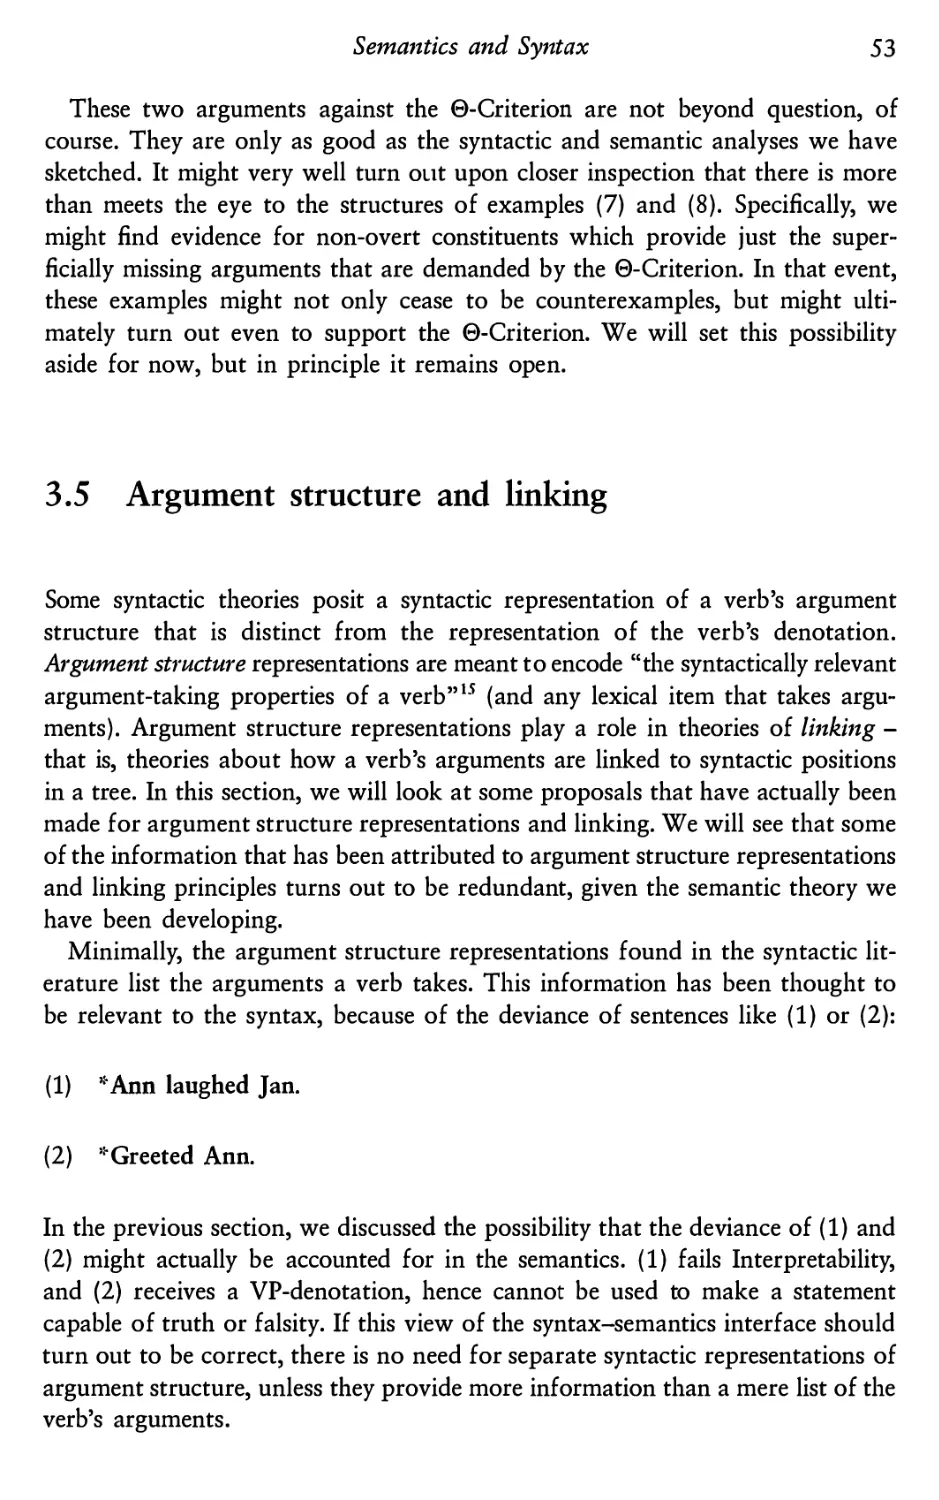 3.5 Argument structure and linking